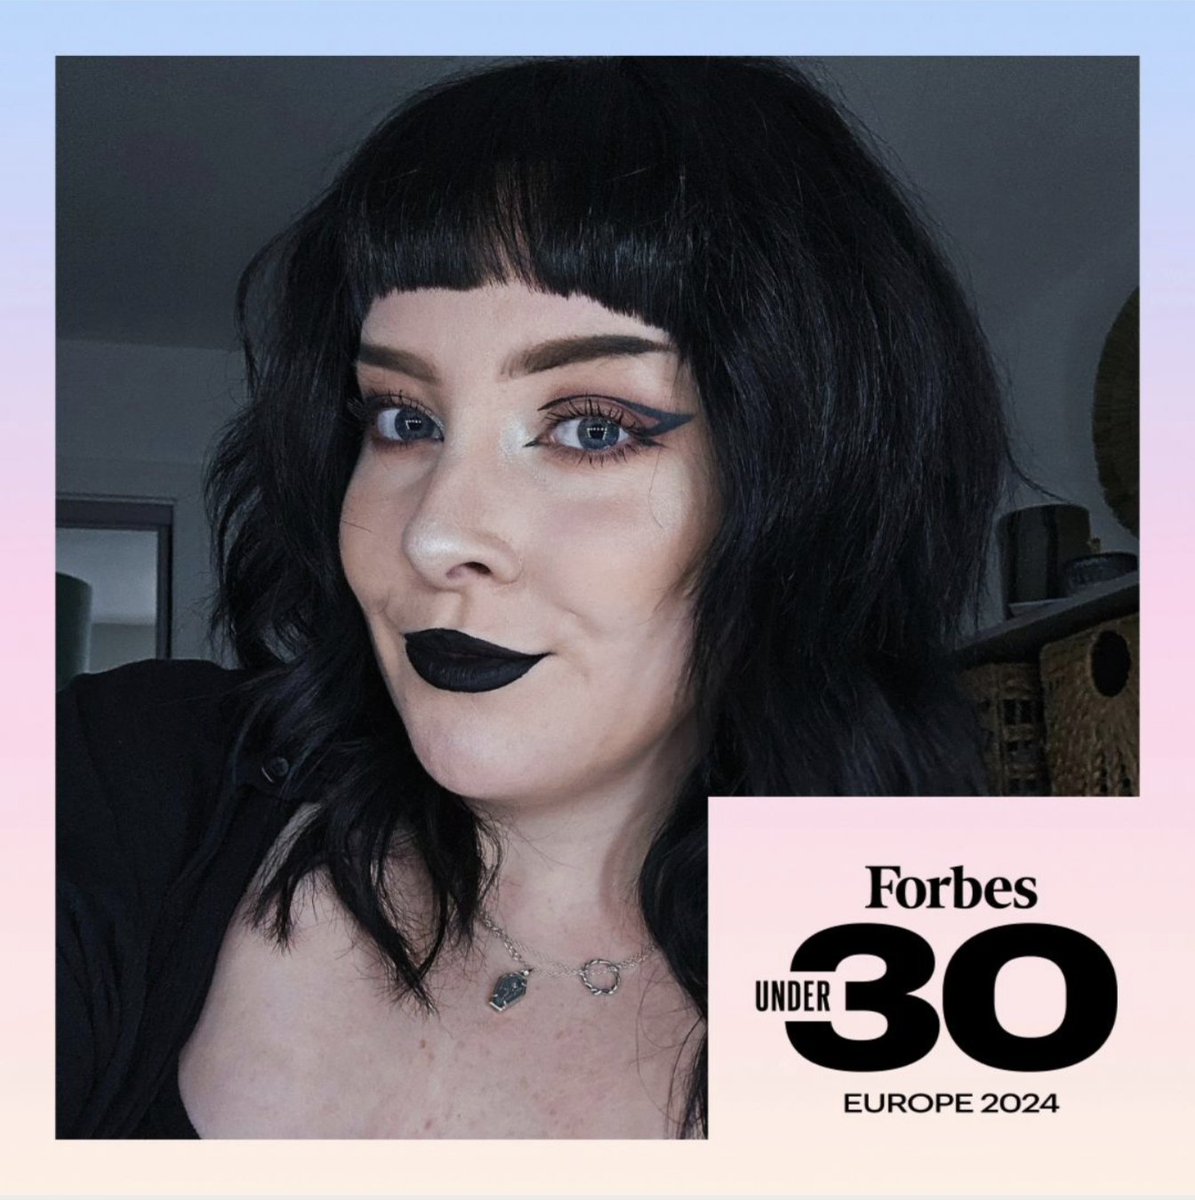 I wanted to share @SariaSlays_ incredible achievement of making it on Forbes 30 under 30 list. Saria is such an incredibly outstanding woman, who empowers anyone around her. She's an absolute badass and so caring. Incredibly proud of you! 💖👑